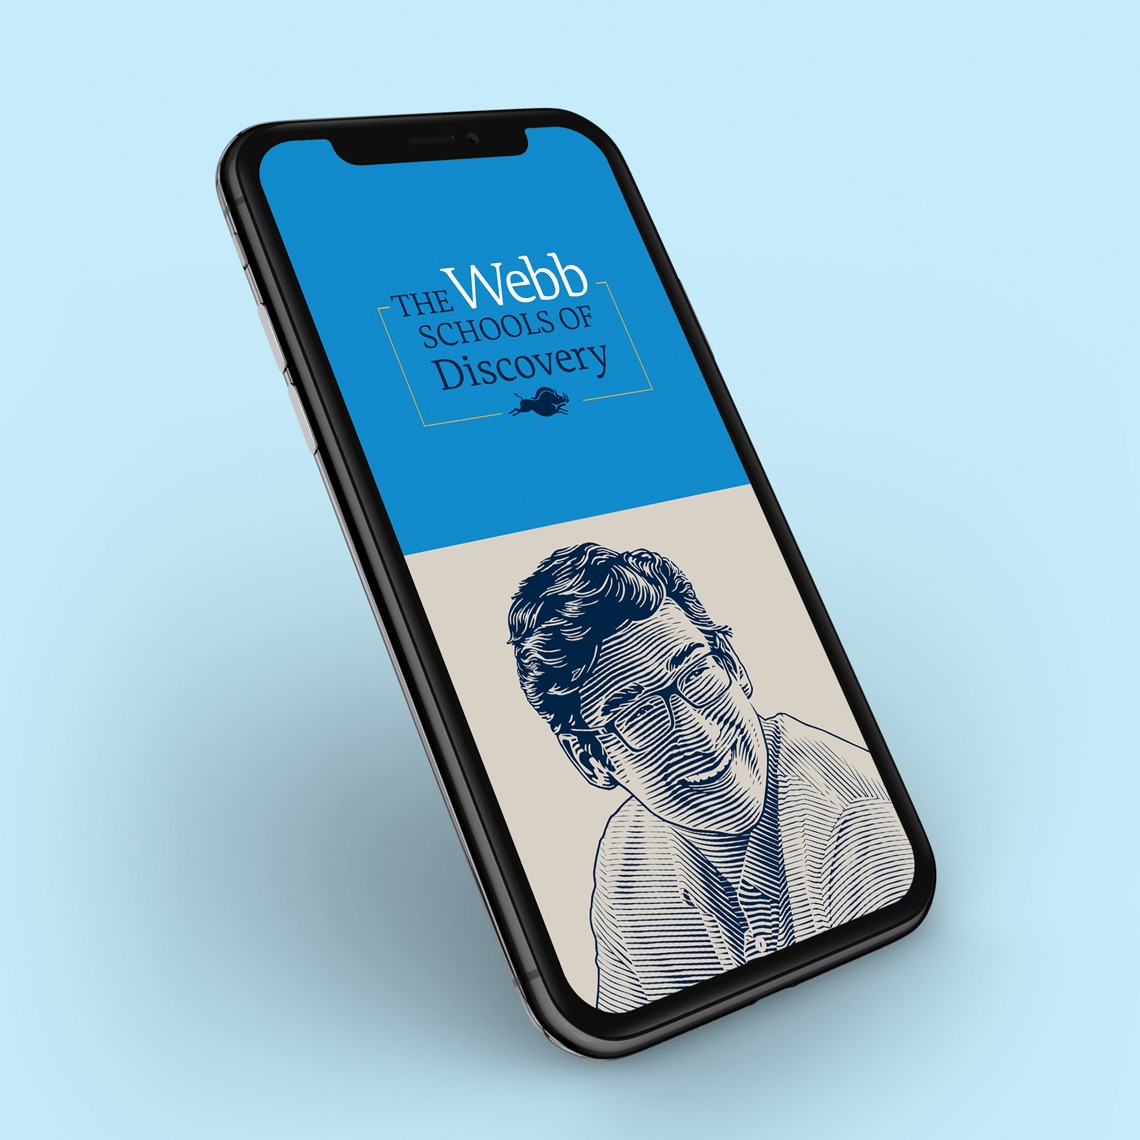 Webb Schools Phone Mockup with Illustration and Design by Kilter